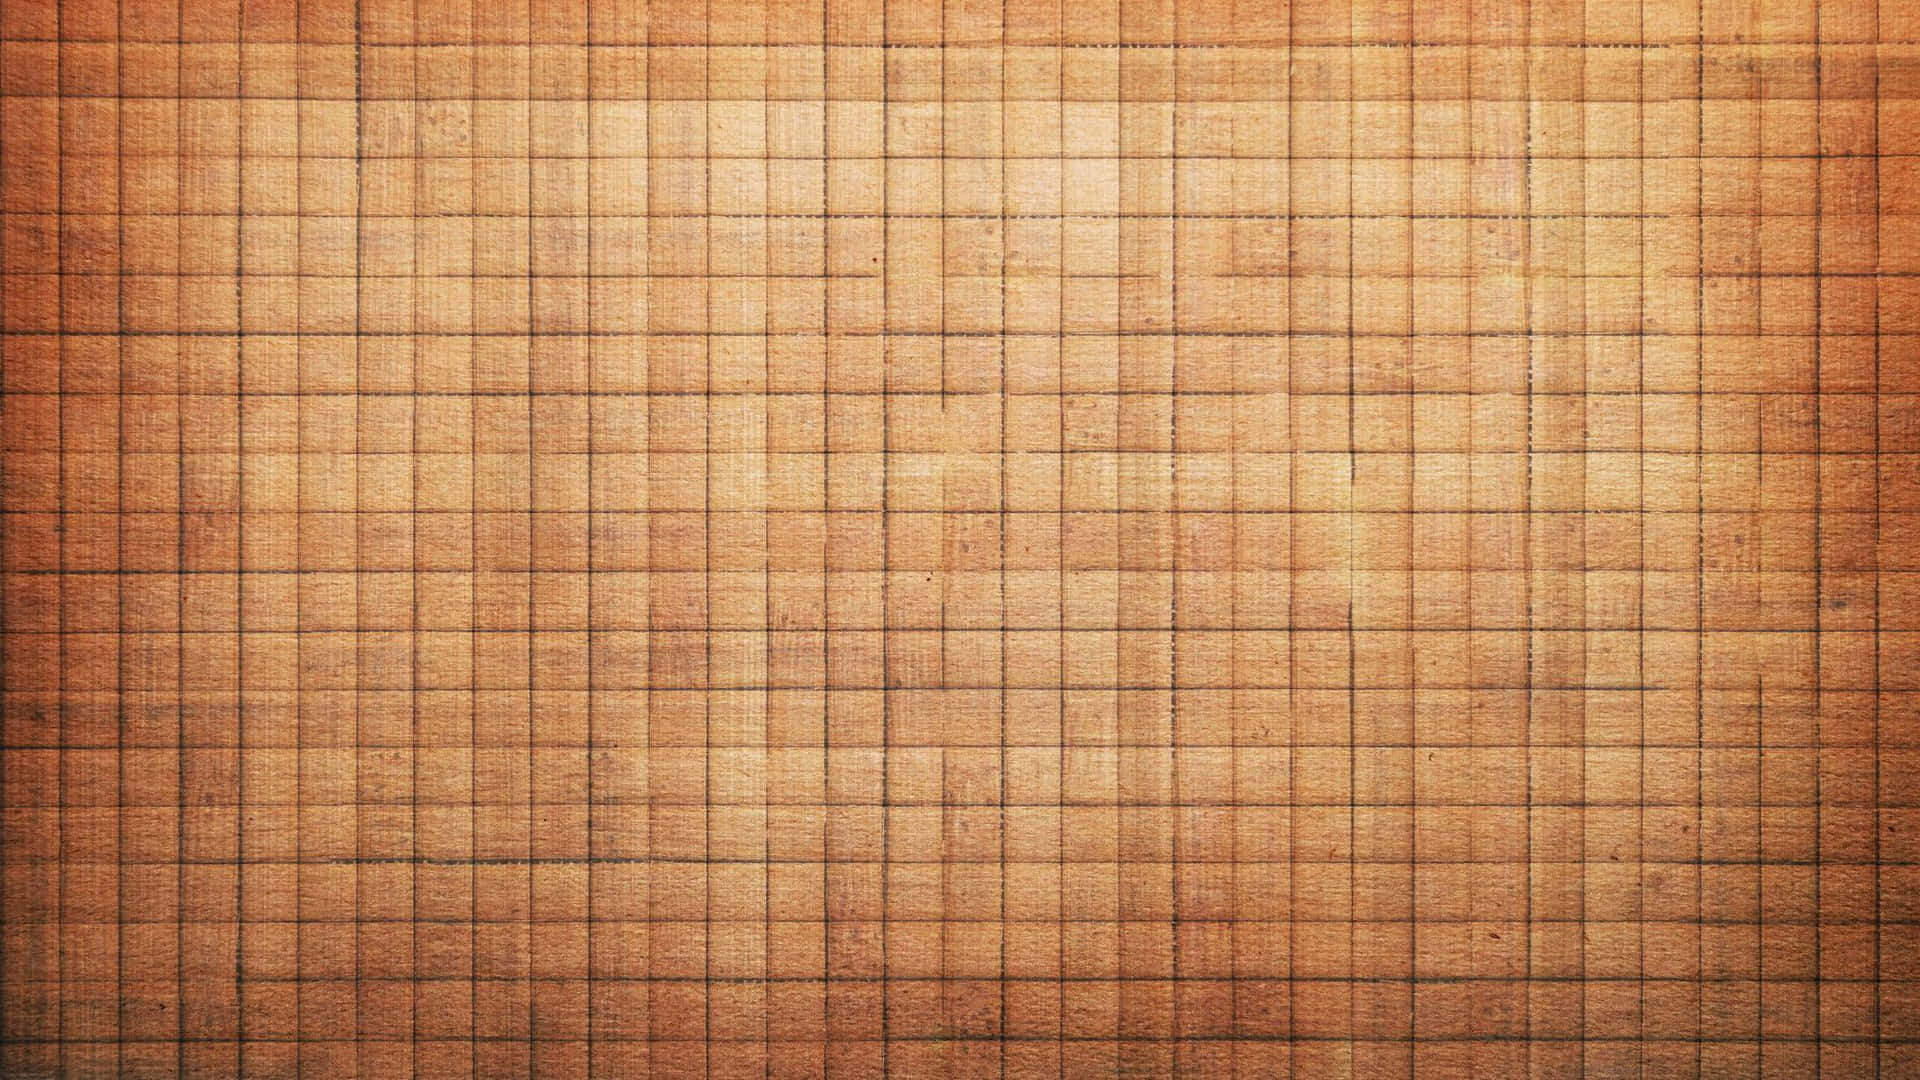 Captivating Brown Textured Background Wallpaper